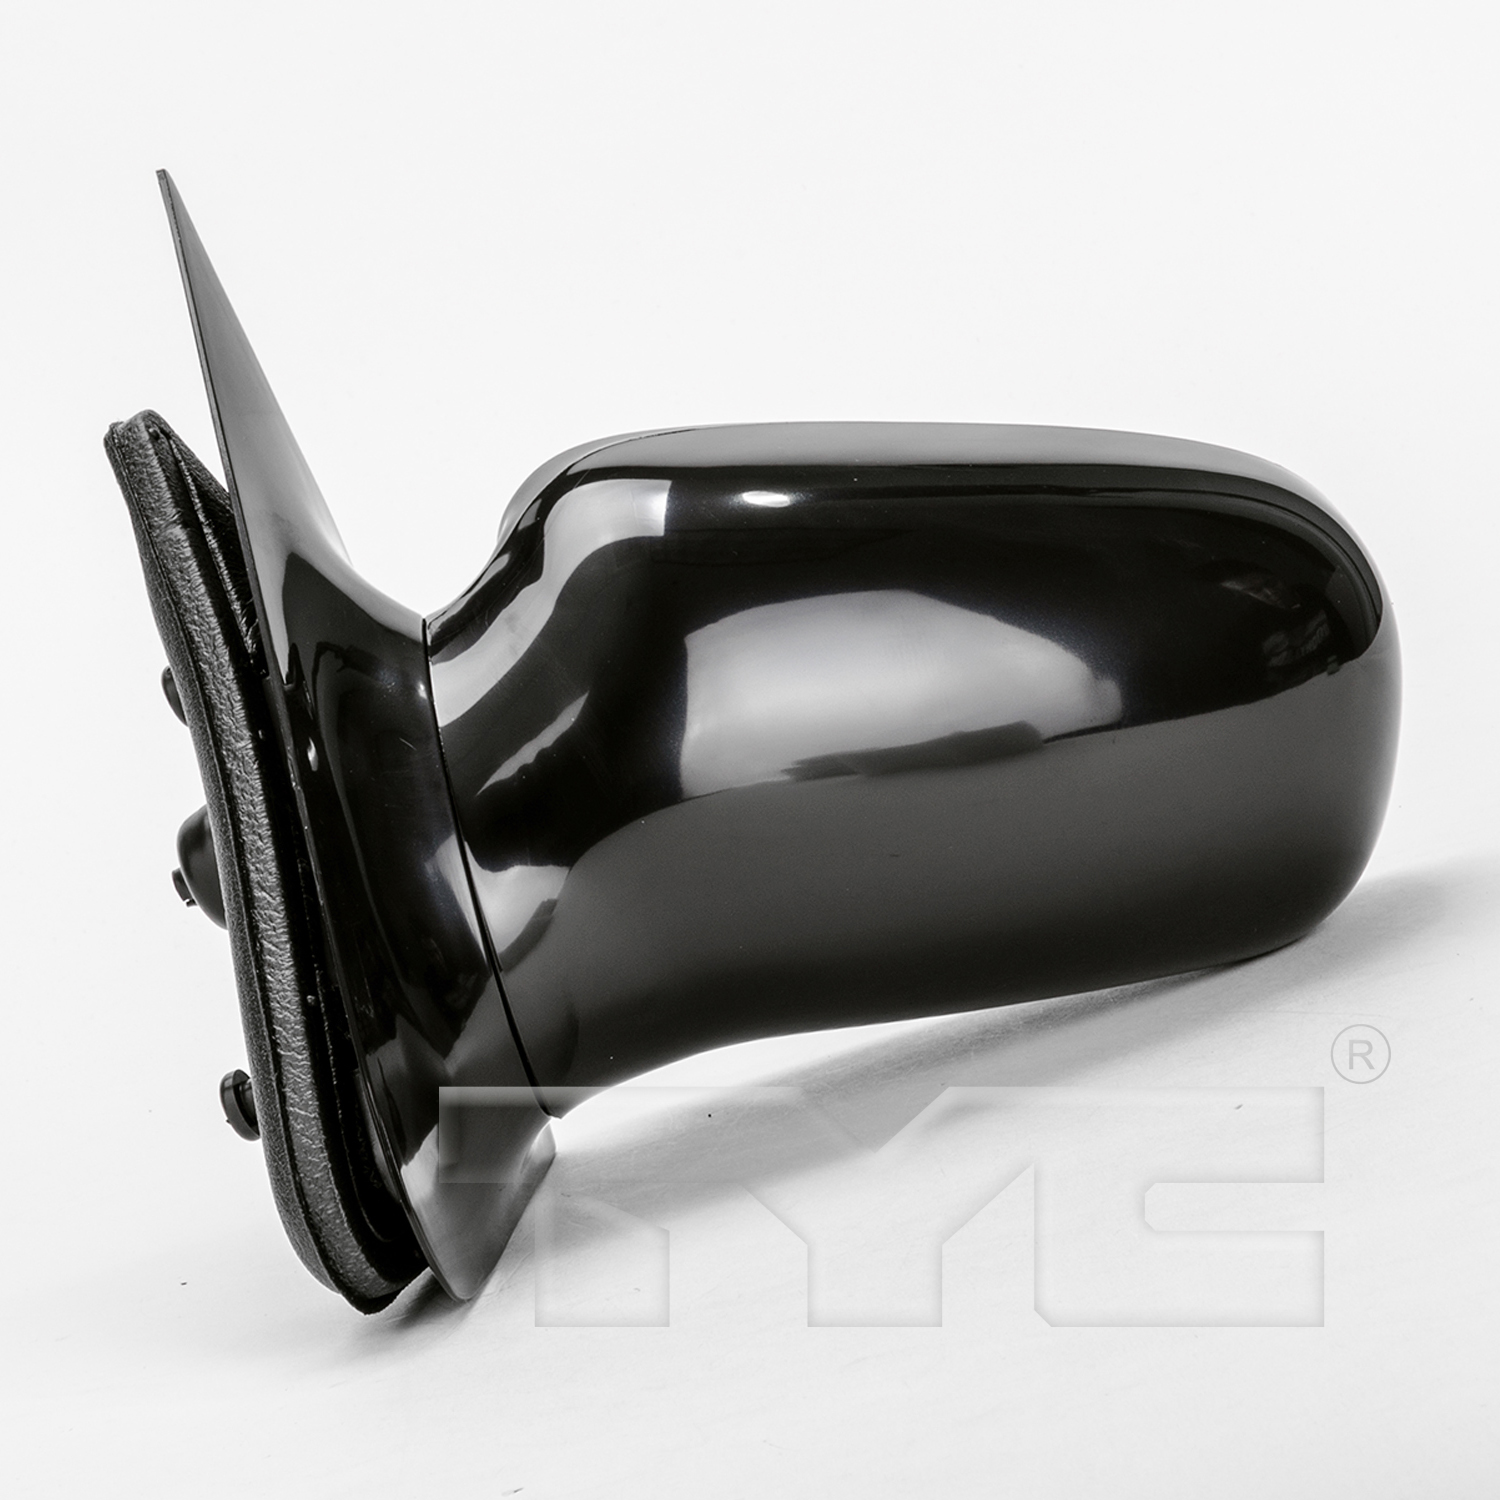 Aftermarket MIRRORS for CHEVROLET - CAVALIER, CAVALIER,95-05,LT Mirror outside rear view